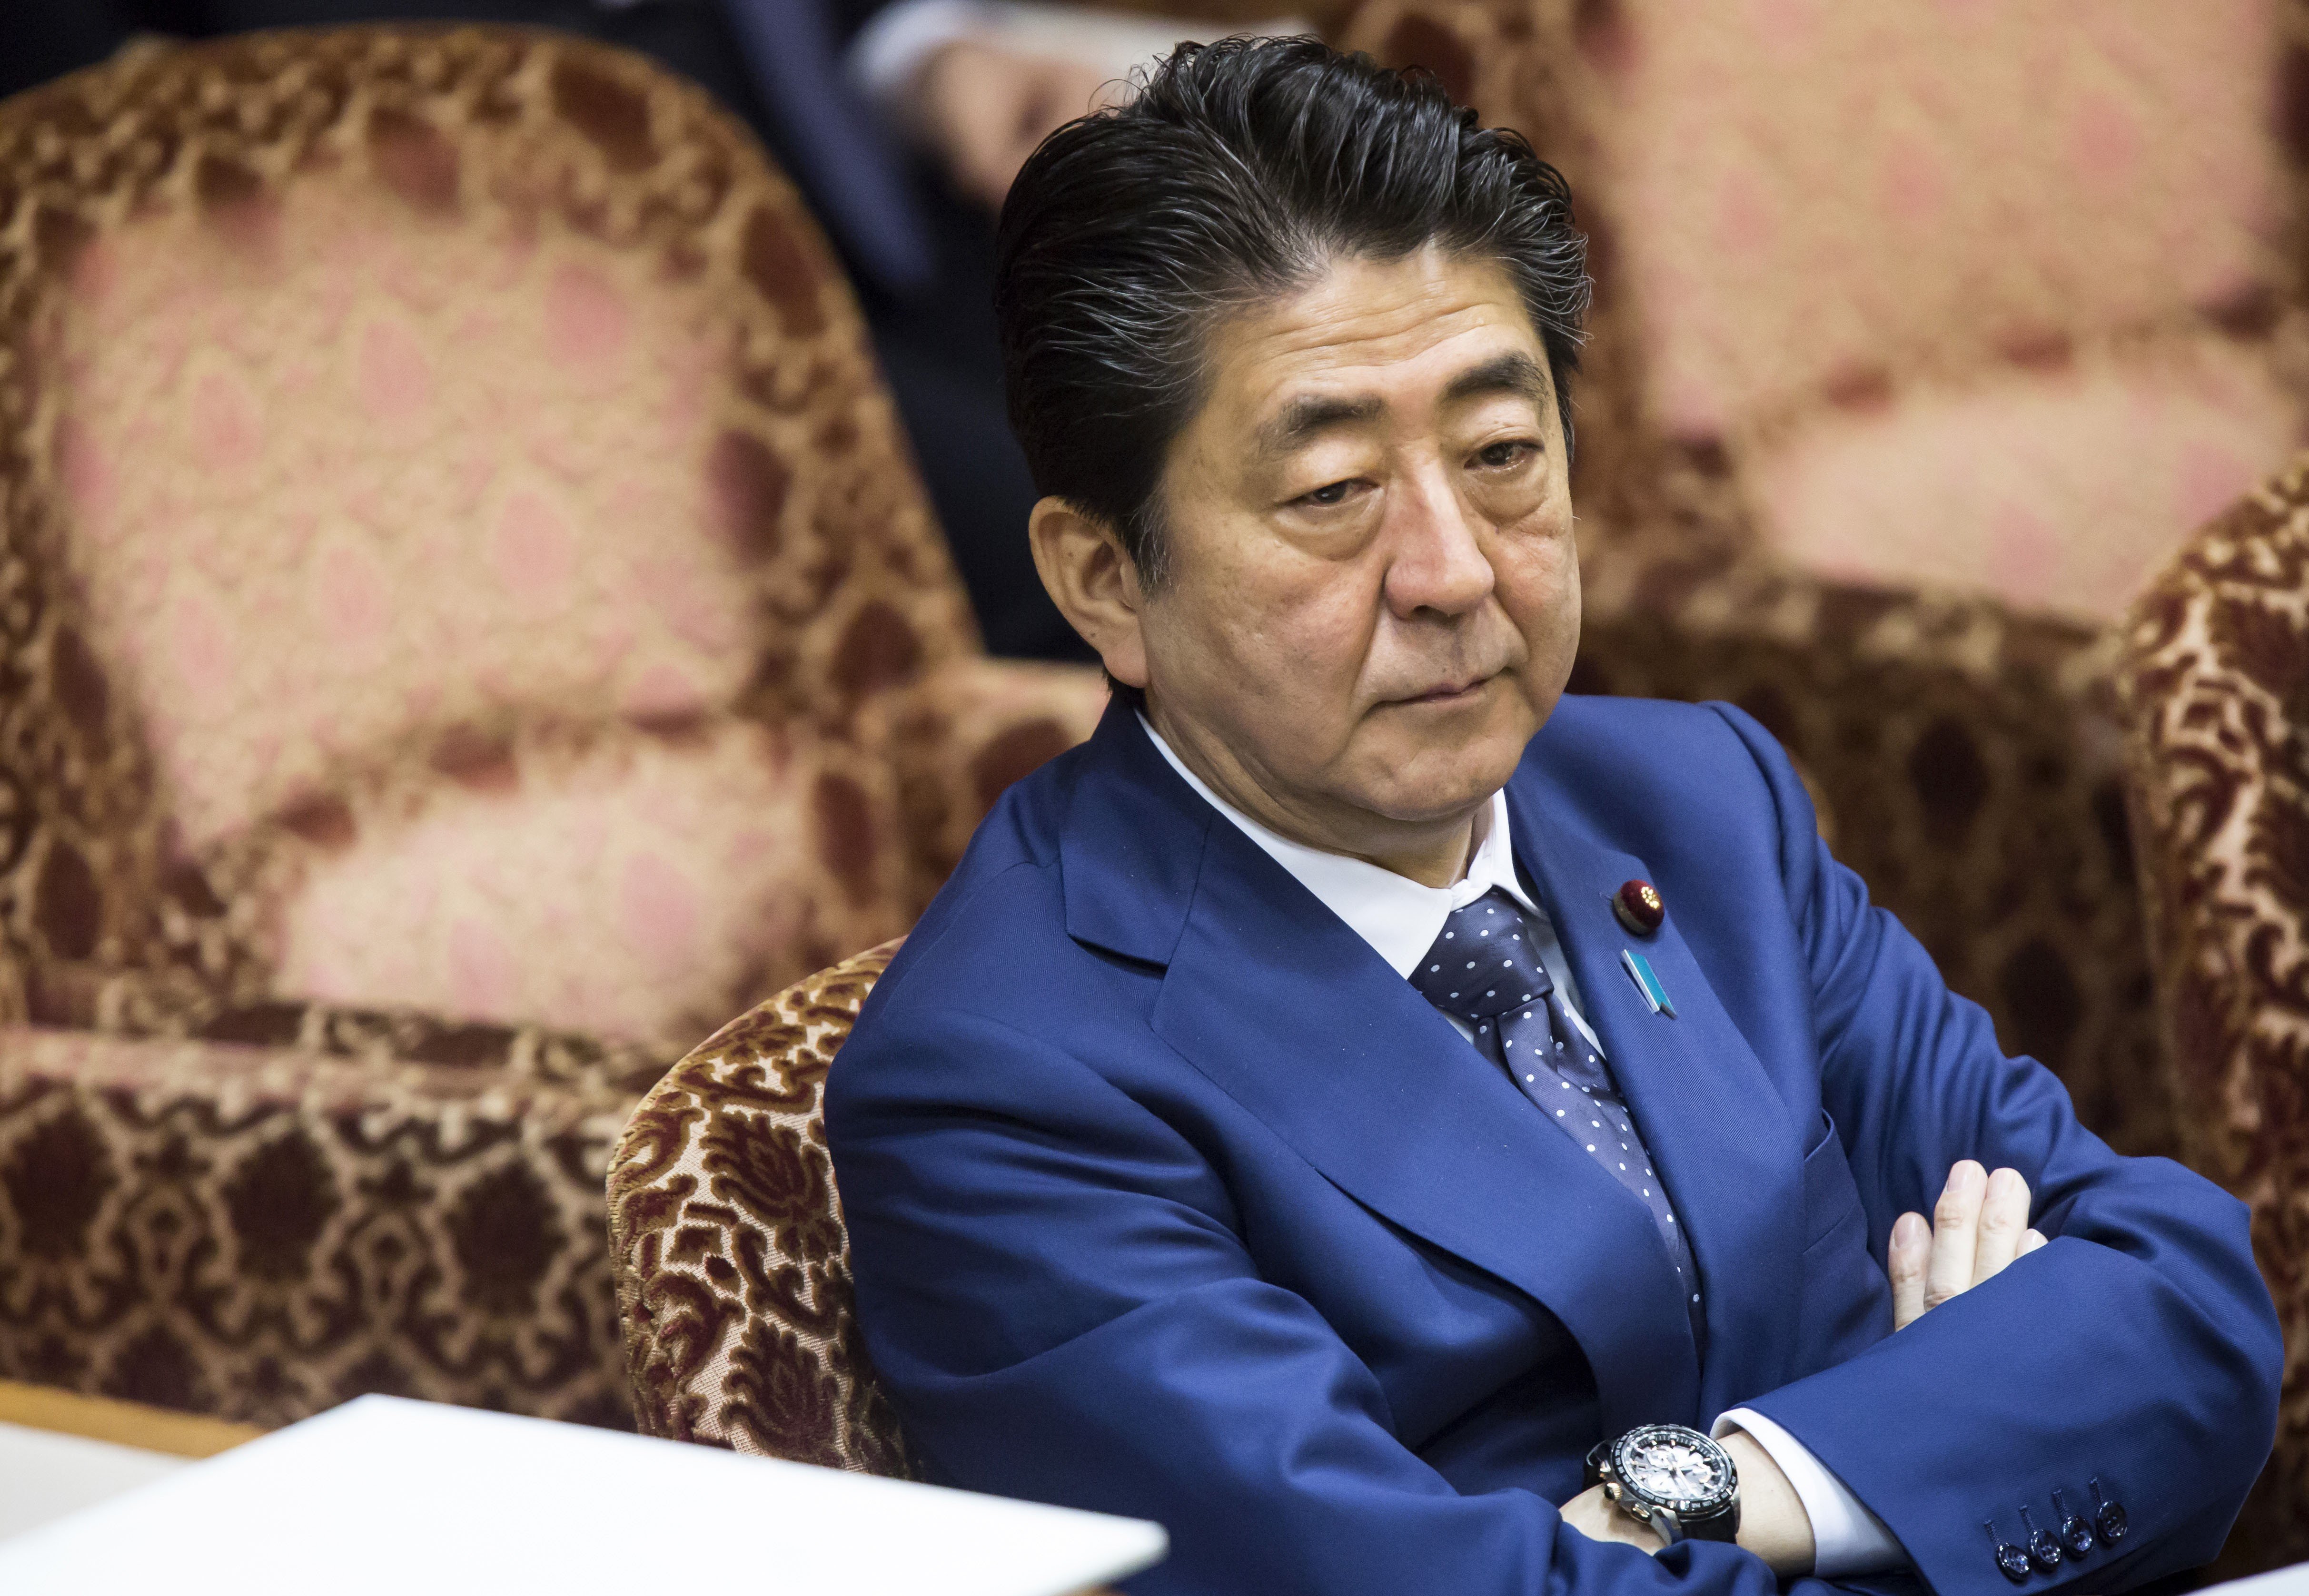 Prime Minister Shinzo Abe is expected to seek re-election later this year as president of the ruling Liberal Democratic Party. If he wins, it could make him the longest-serving Japanese prime minister ever. Photo: Bloomberg